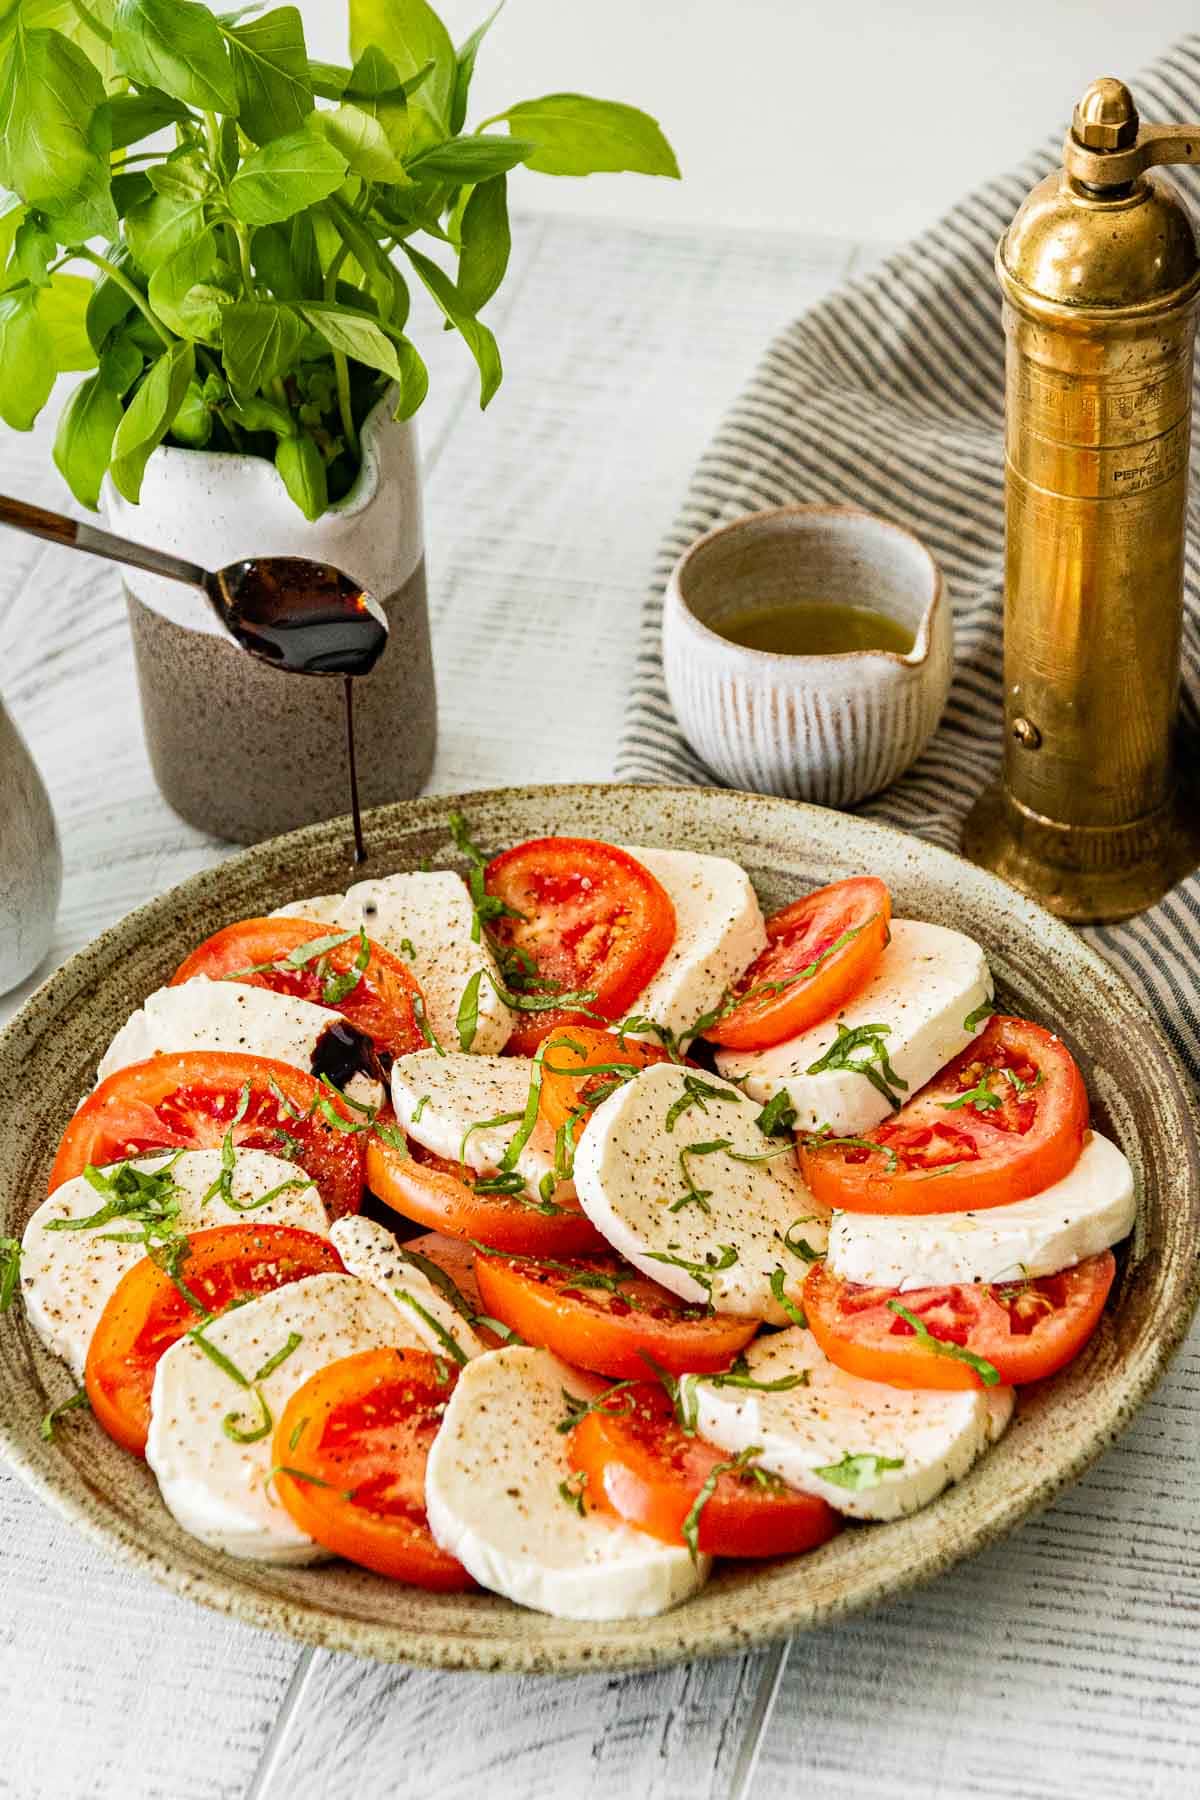 Caprese Salad with Balsamic Reduction drizzling reduction